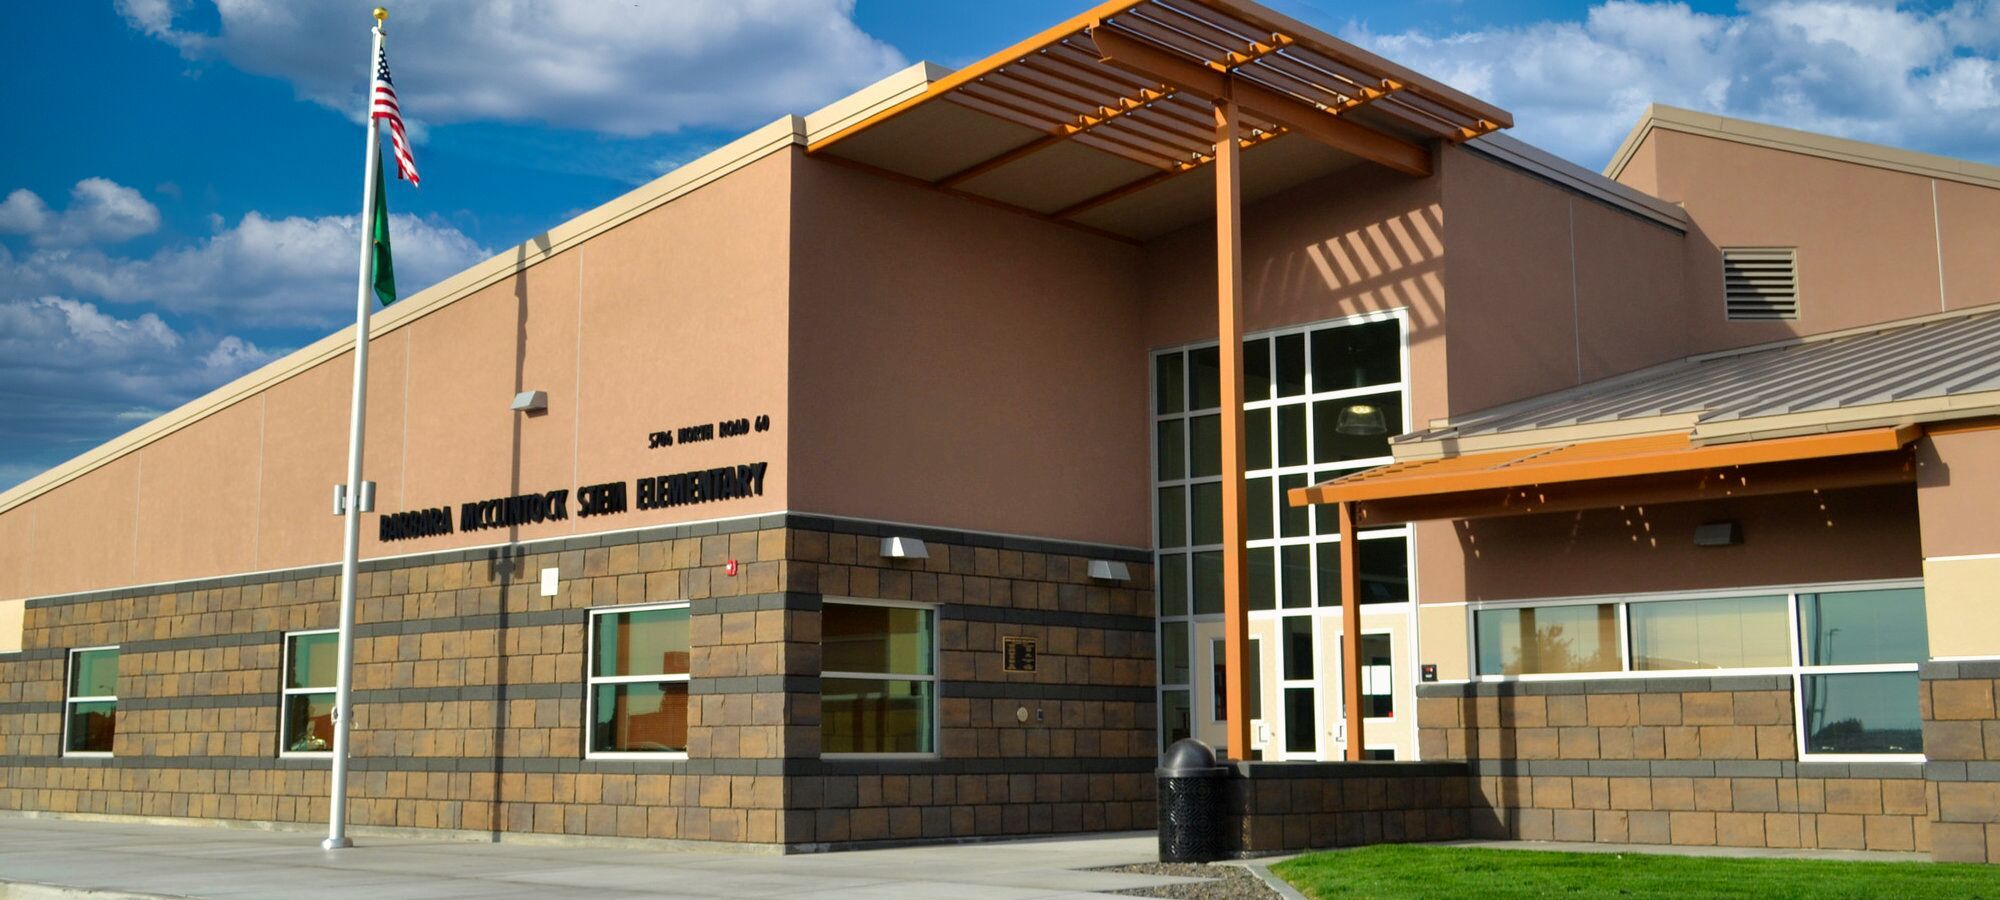 McClintock Elementary STEM School Homes for Sale and Information in the Pasco School District in Washington State